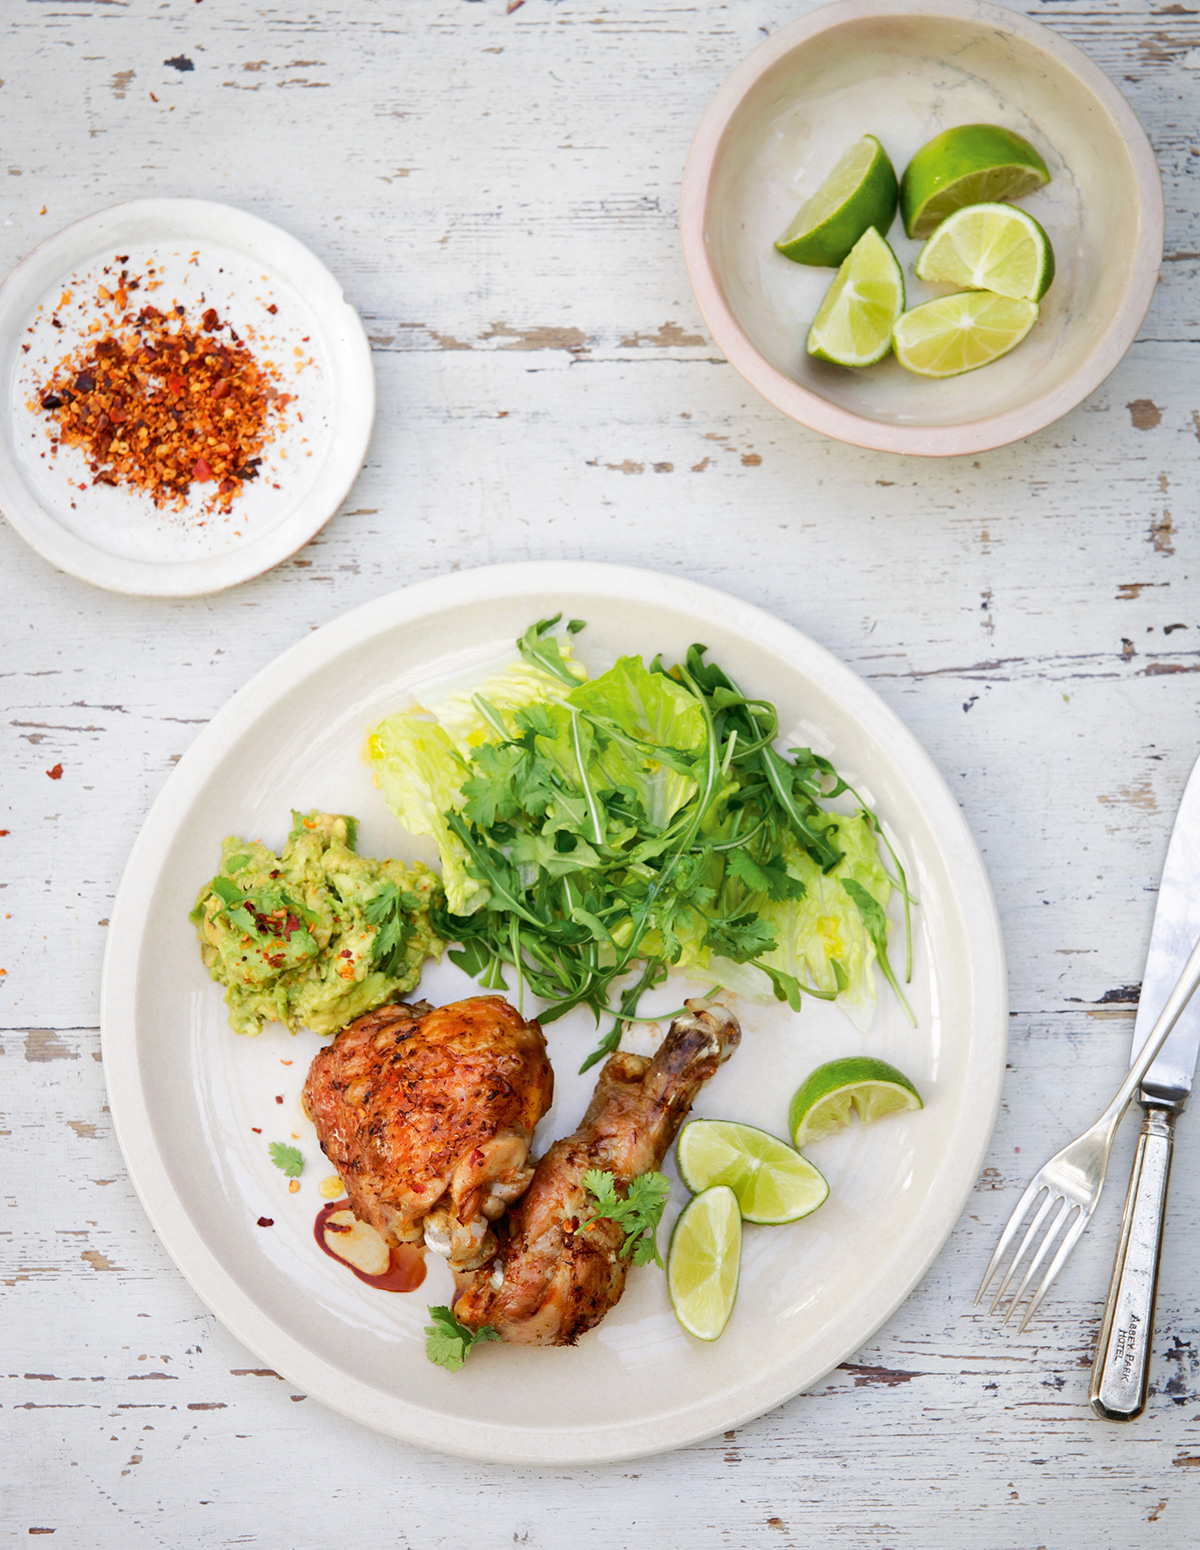 Tequila and Lime Chicken